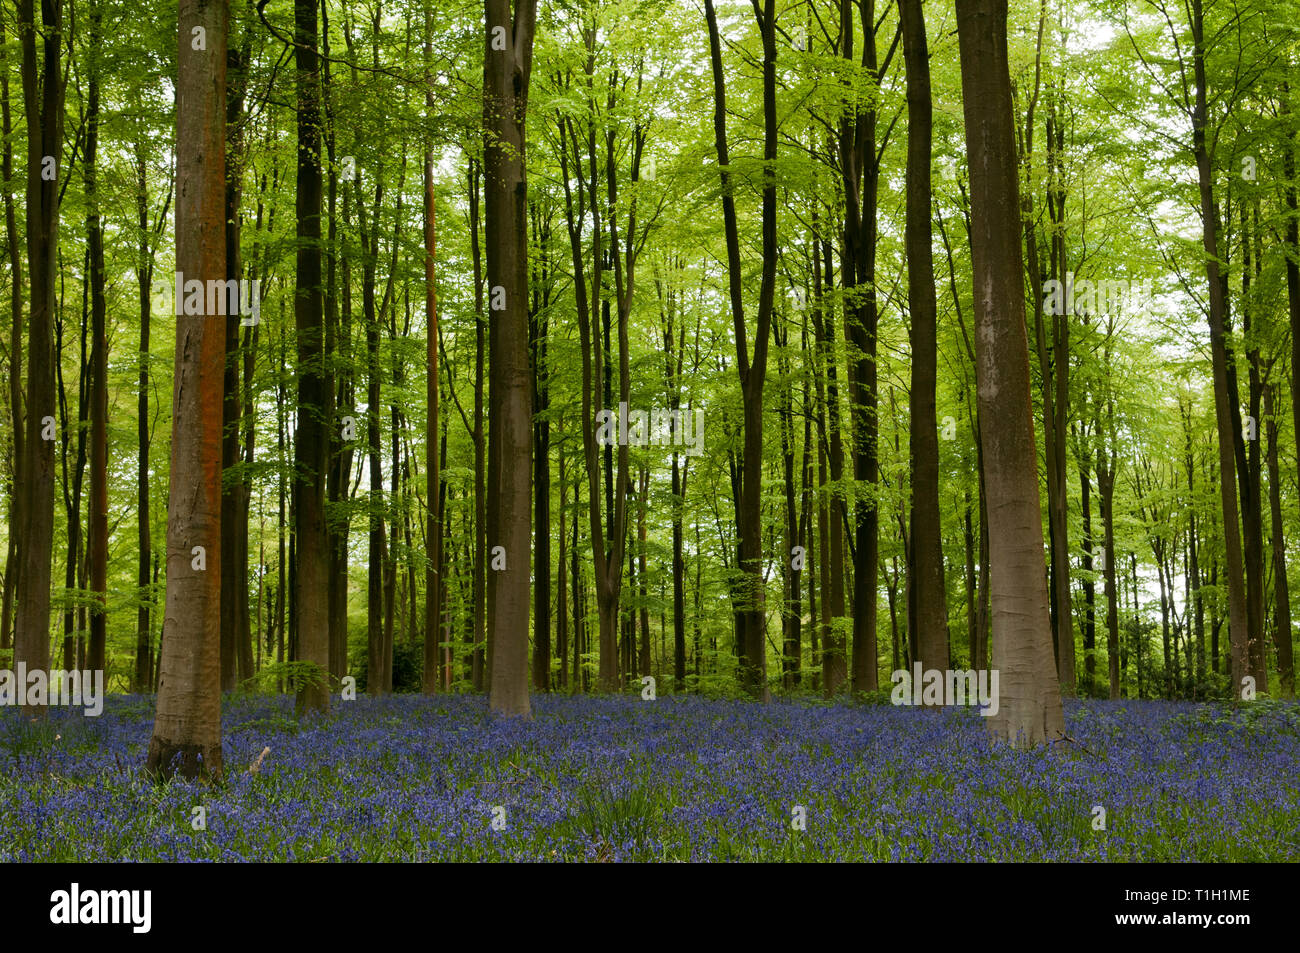 Stunning display of bluebells under a canopy of beech trees Stock Photo